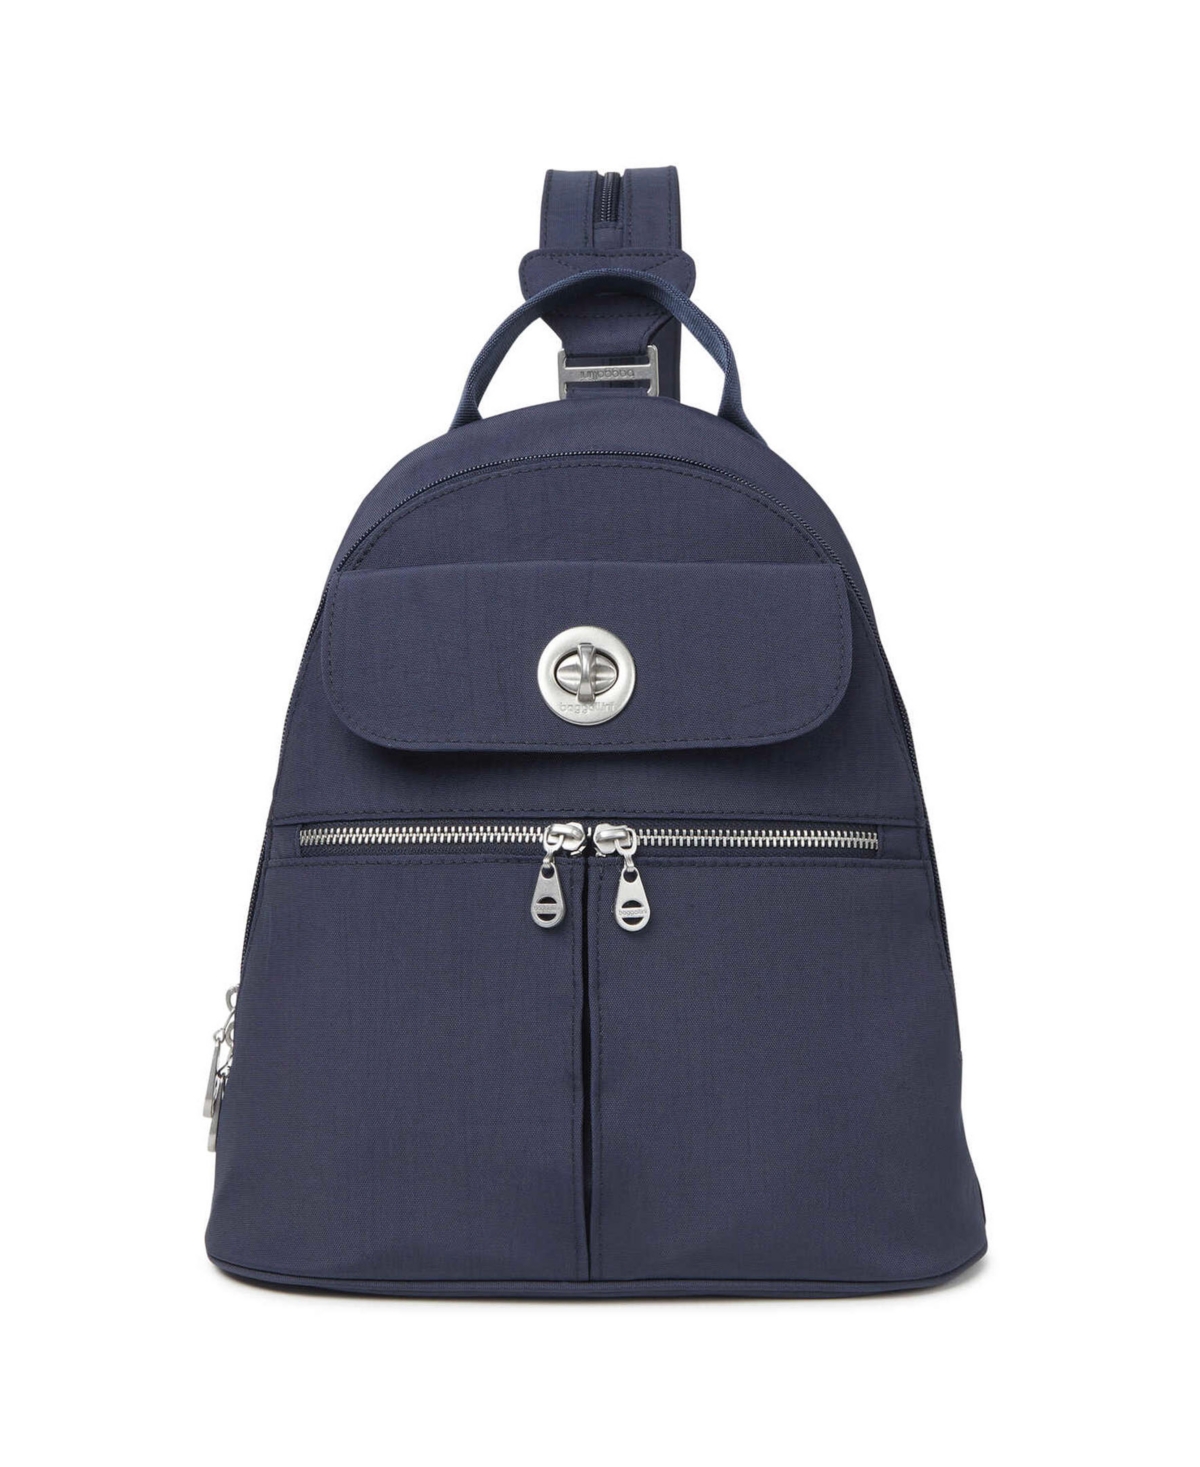 Backstage Baggallini Naples Convertible Backpack In French Navy